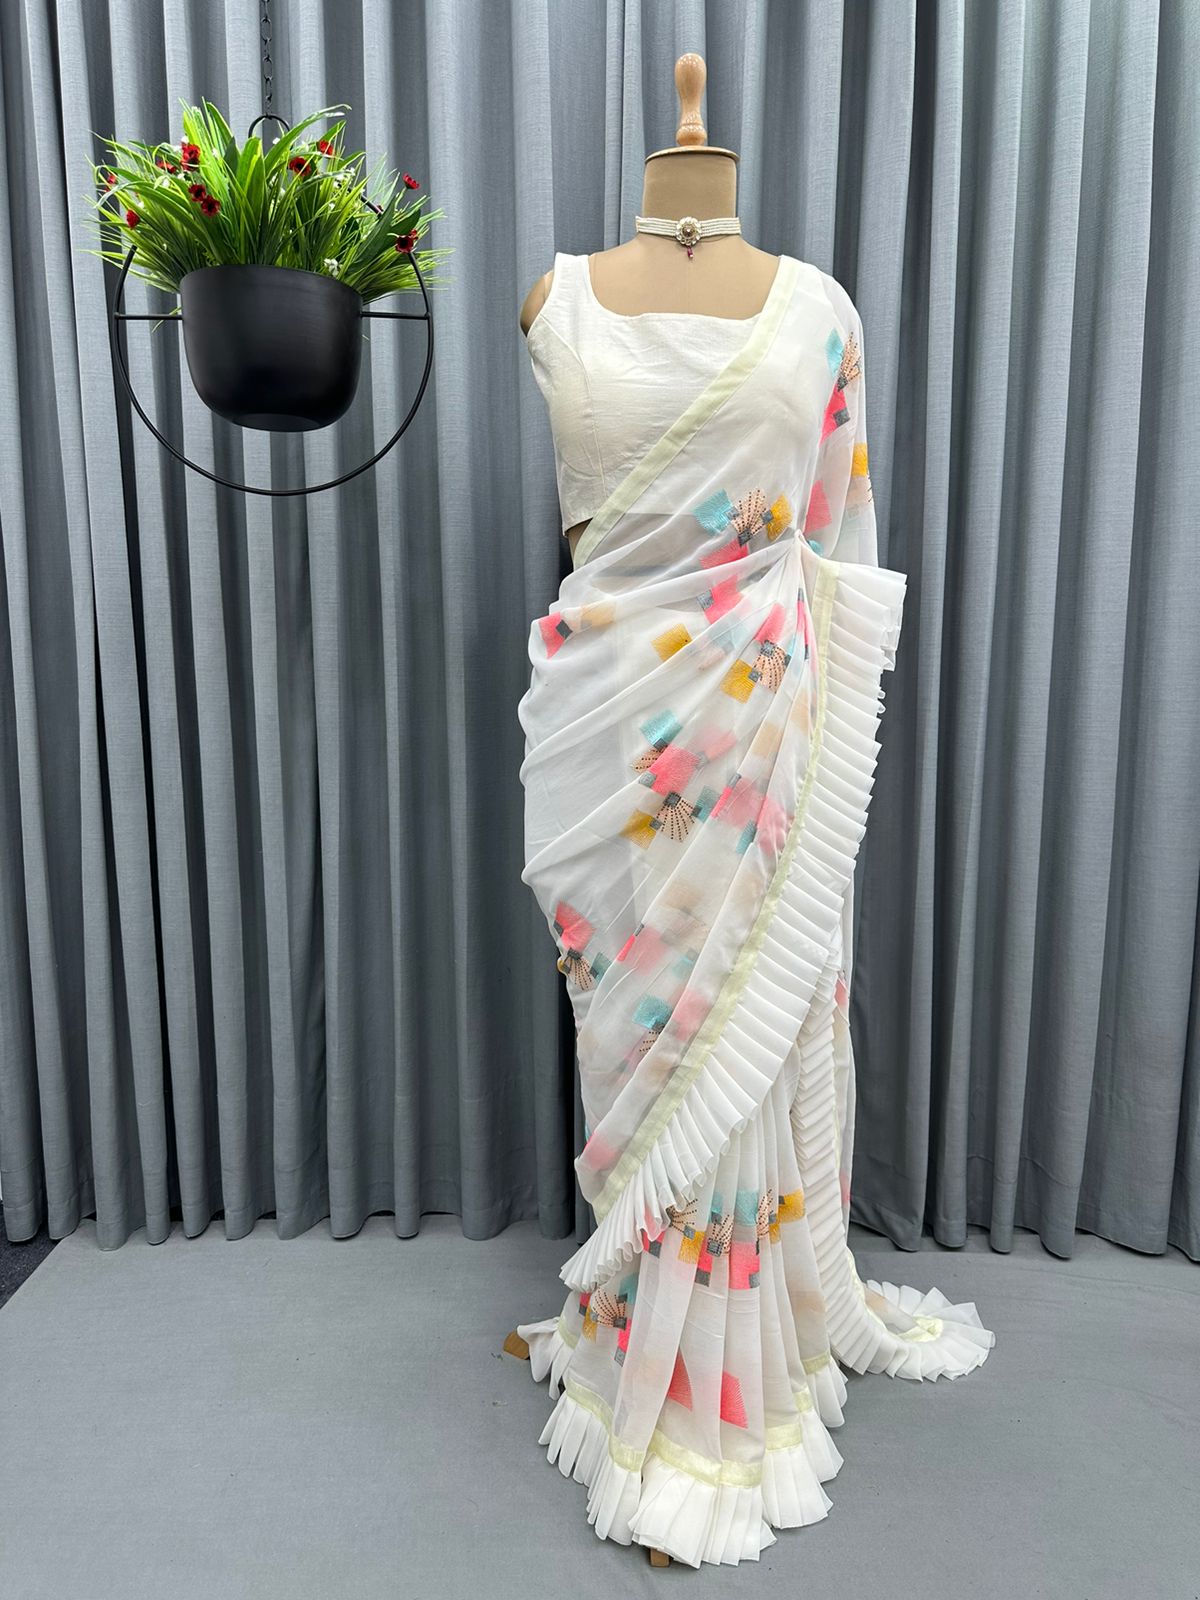 Buy Aswin Print Dola Silk Materials with Hot Fix Stone Work, Weaving Design|Unstitched  Blouse Brocket Lace Blouse FABRIC |Heavy Boarder Saree for Women at  Amazon.in